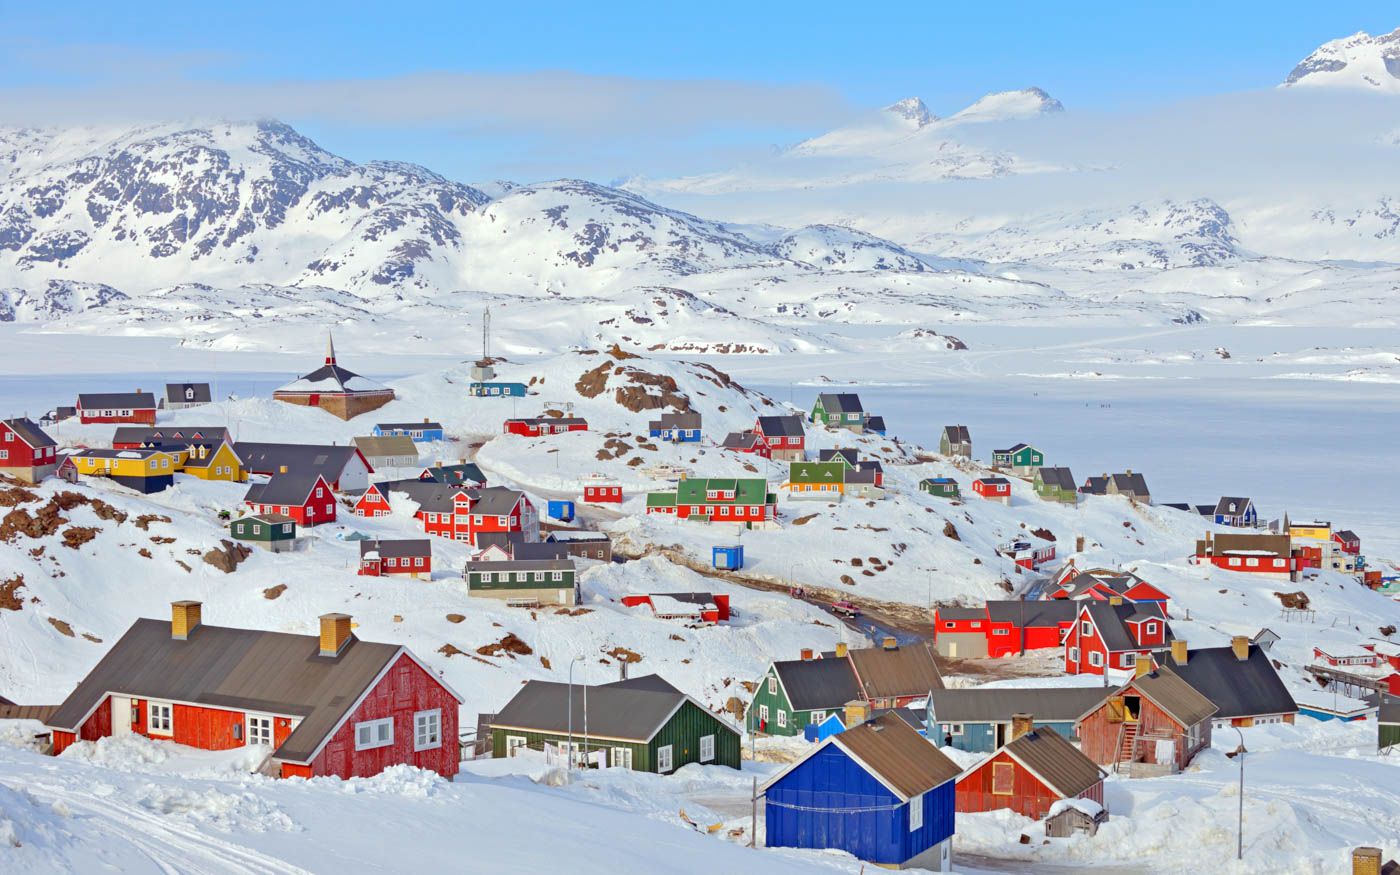 greenland travel cost - average price of a vacation to greenland